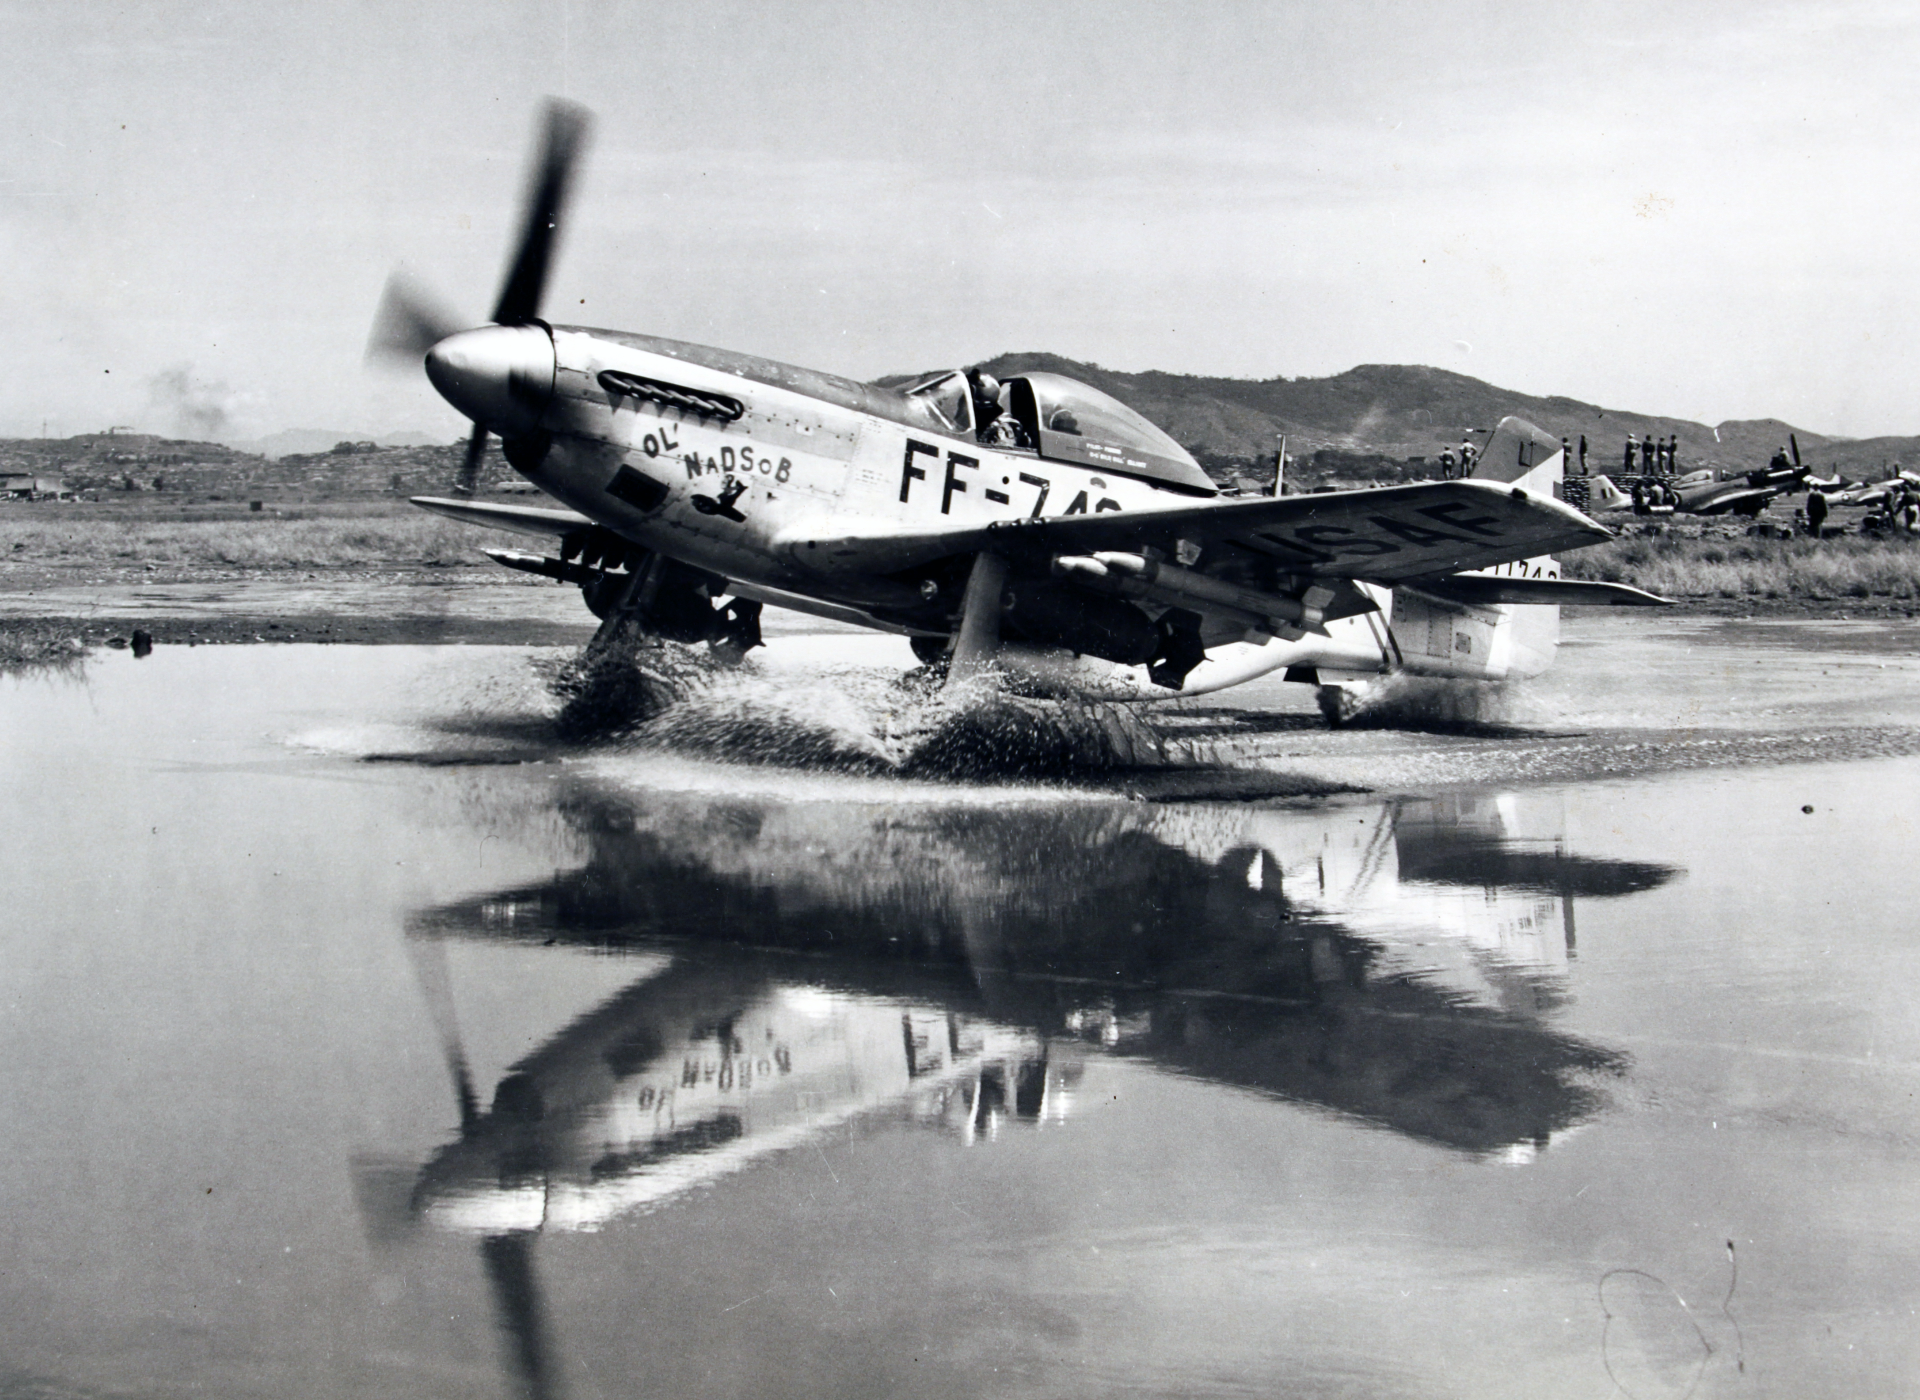 The last P-51D Mustang made by North American Aviation